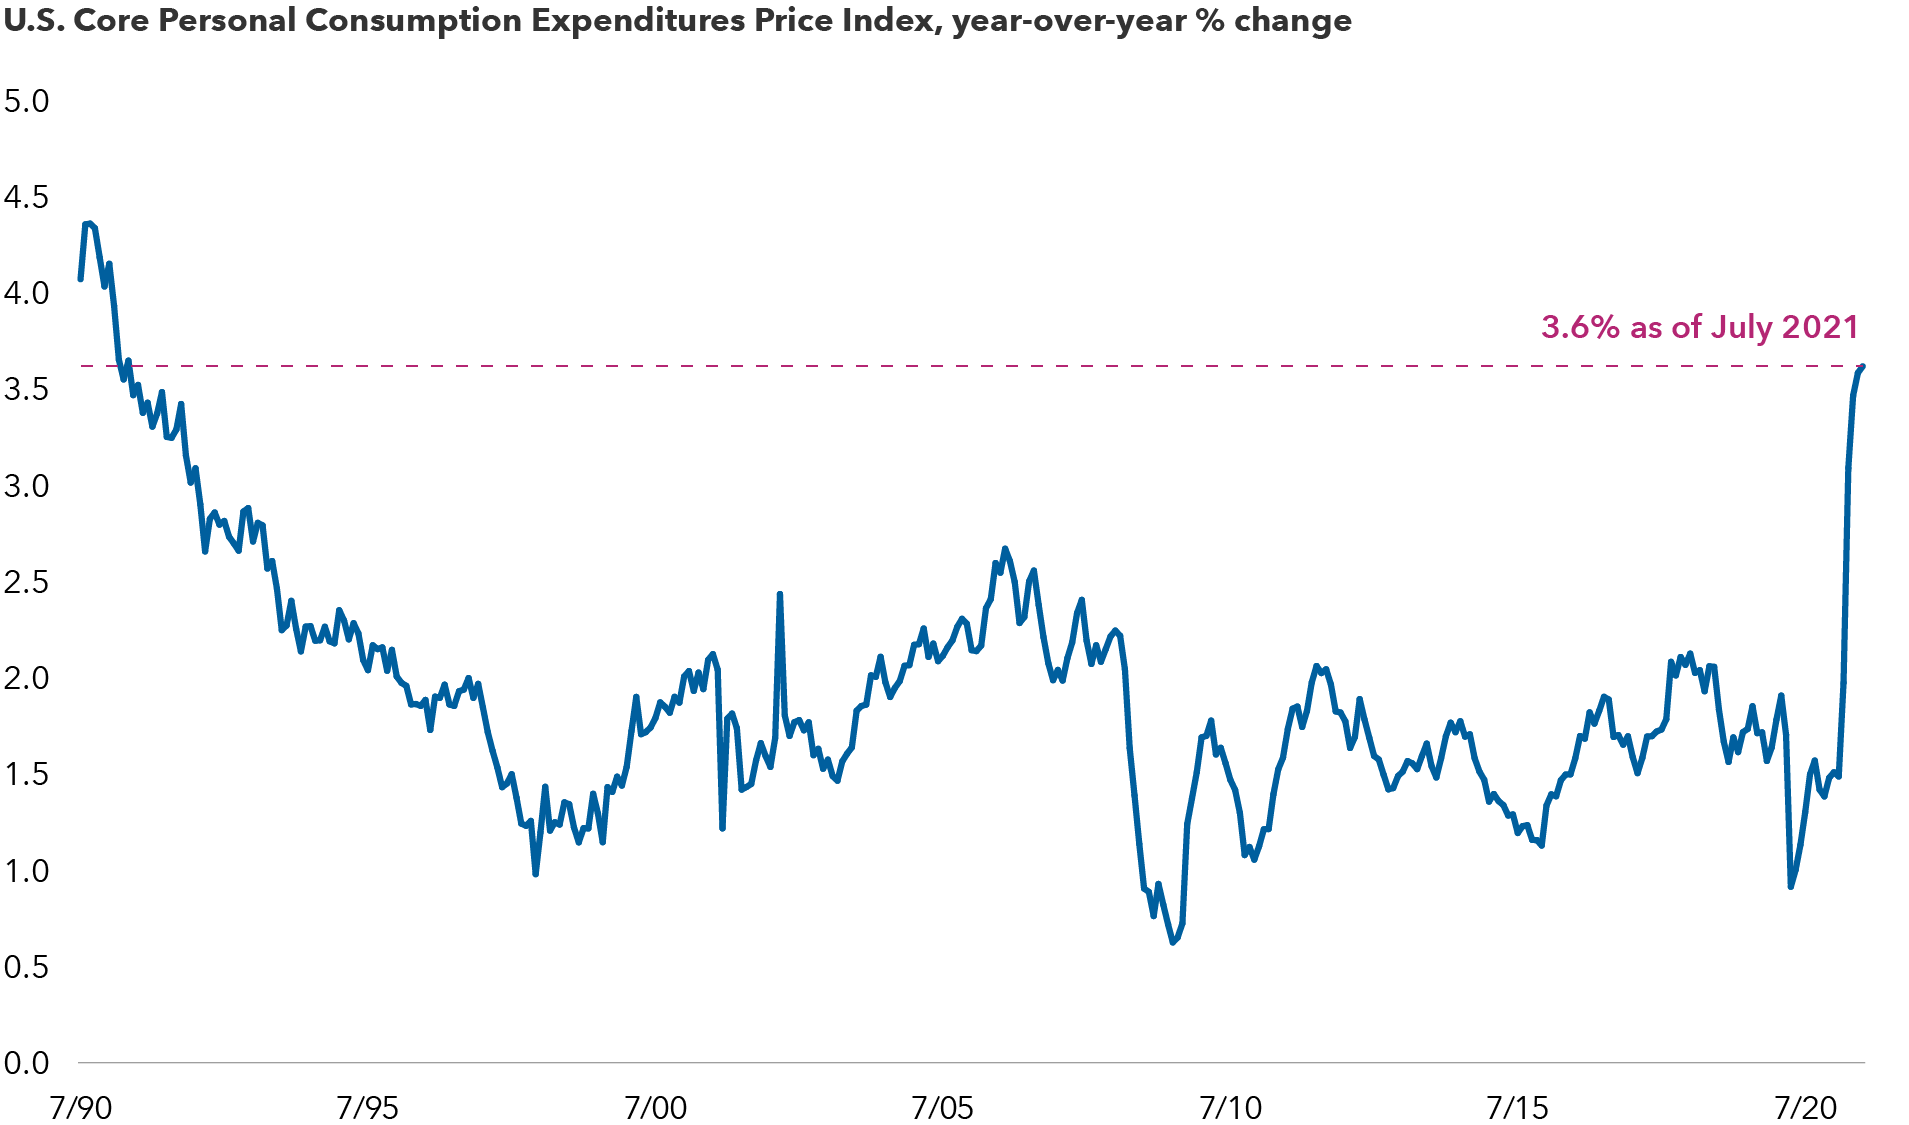 This exhibit is a chart showing the U.S. Core Personal Consumption Expenditures Price Index, year-over-year % change. This measure of inflation excludes food and energy prices. It shows that in 2021, this measure of inflation has risen to 3.6%, the highest rate since 1991. The chart has a dashed line drawn from that point over the 30-year period, during which inflation was mostly below 2.5%.